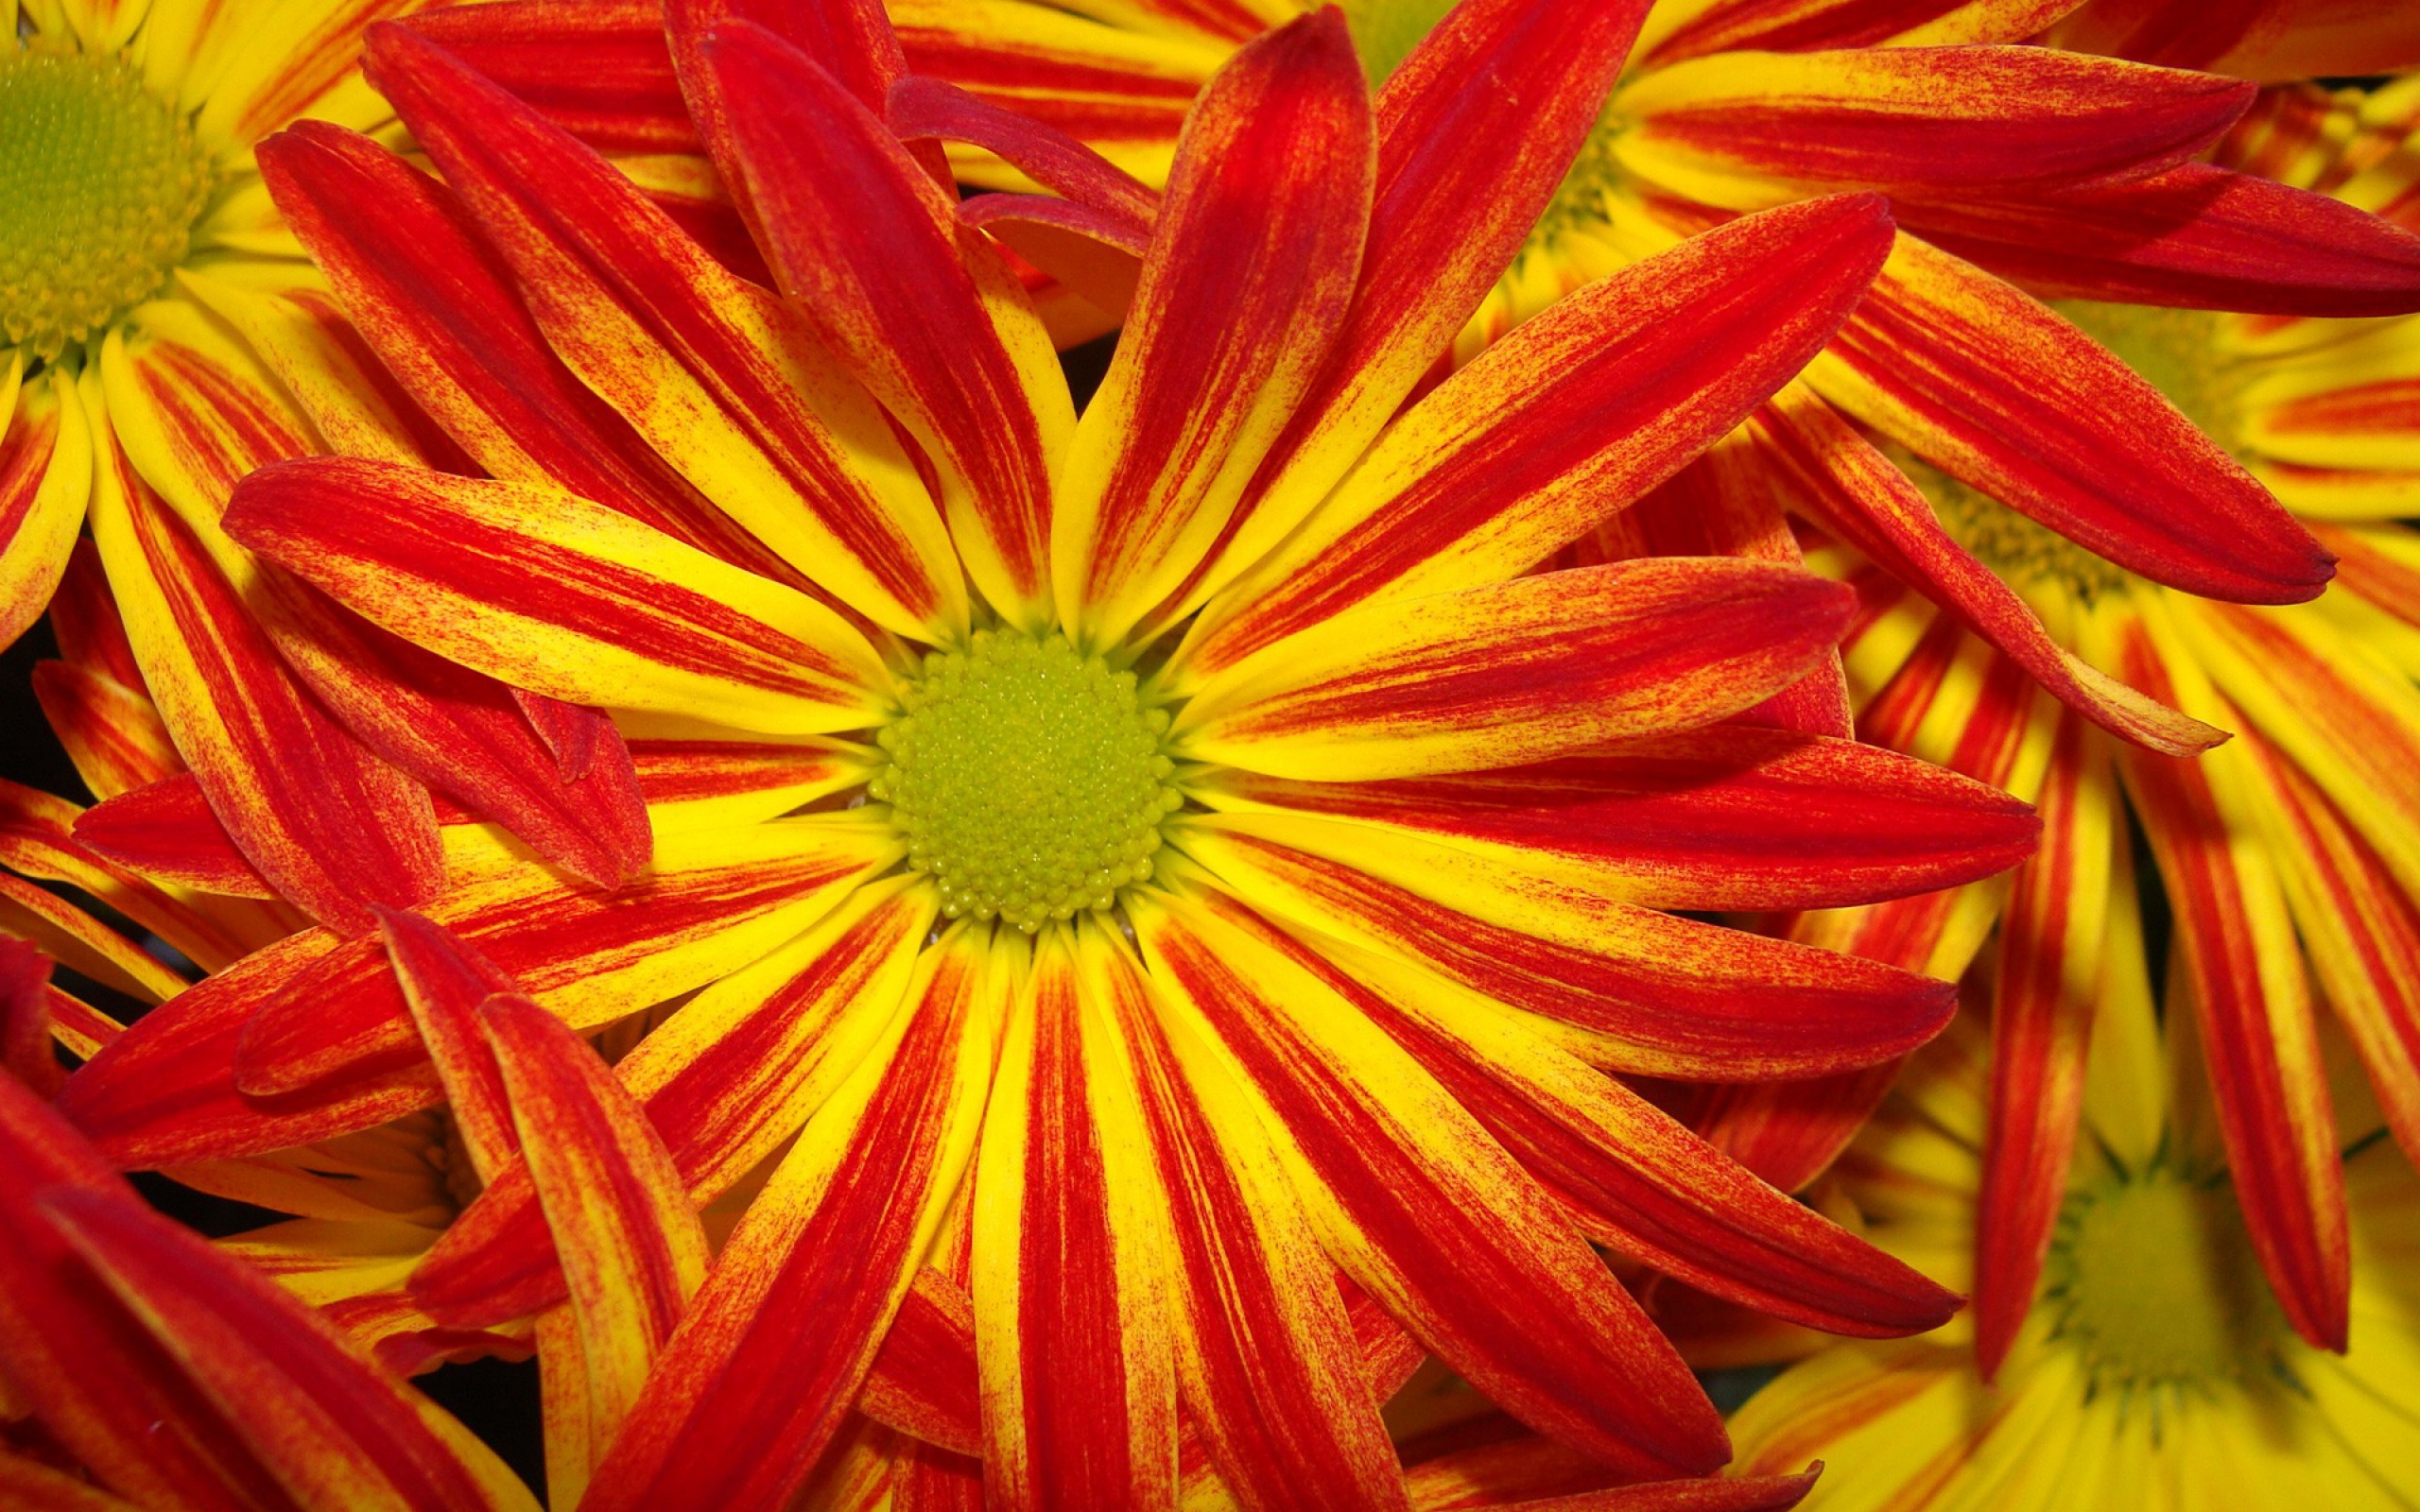 earth, daisy, bright, flower, nature, red flower, yellow flower, flowers